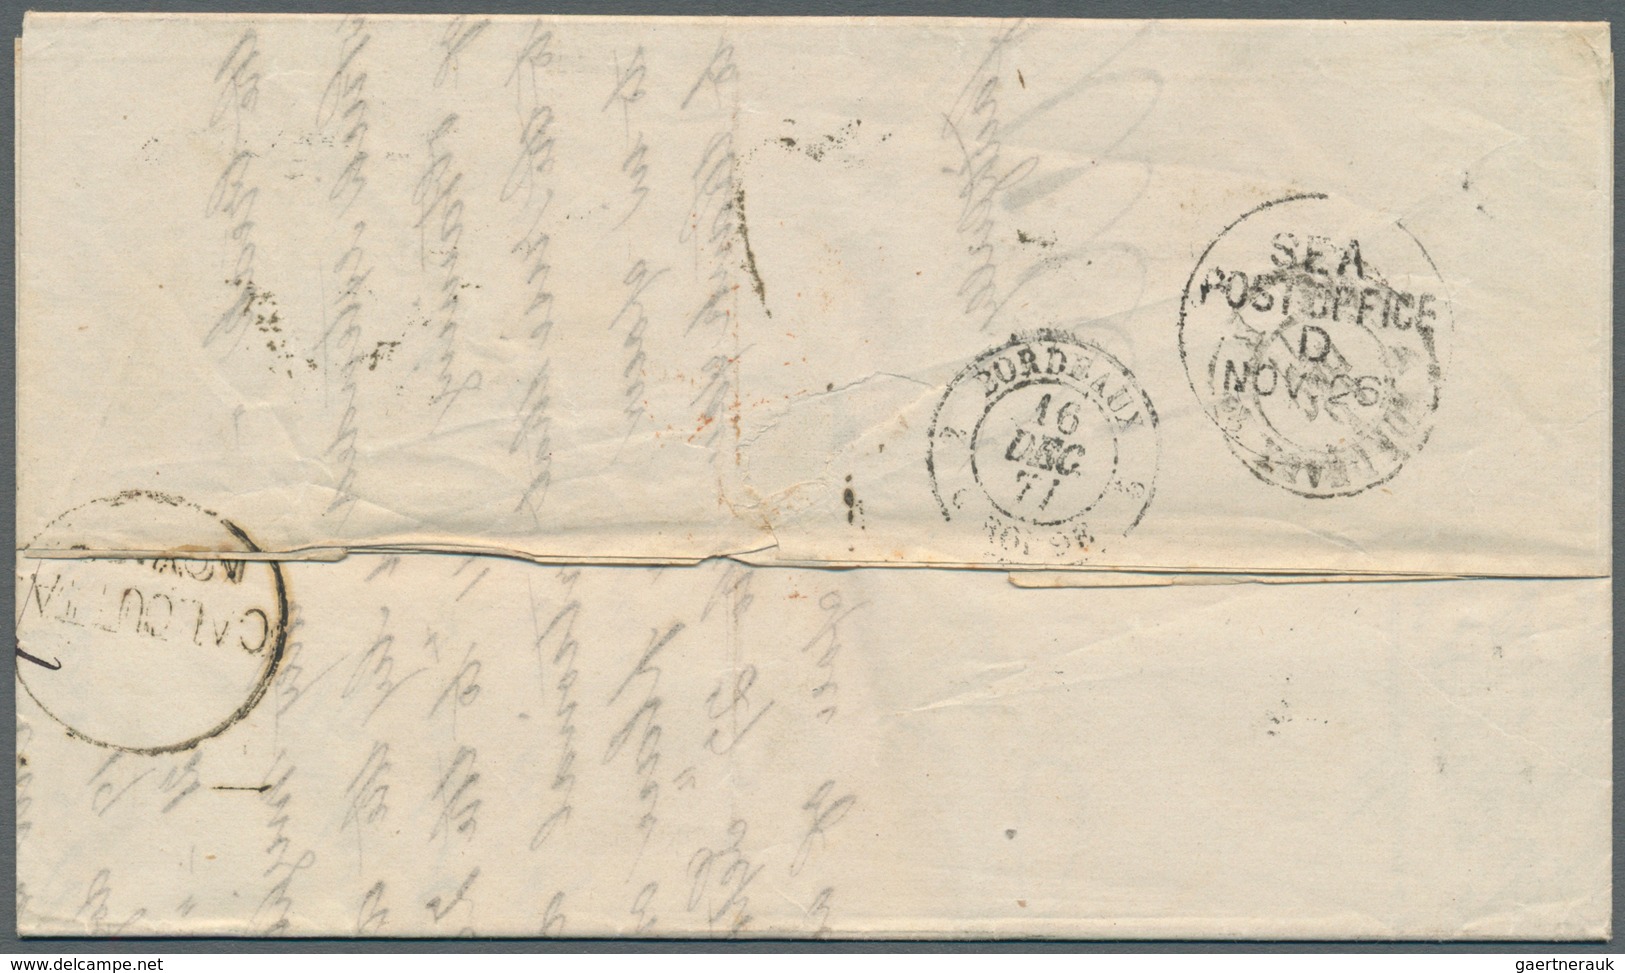 Indien: 1877. Stampless Envelope Written From Calcutta Dated '23rd Nov 1877' Addressed To France Can - 1852 Sind Province